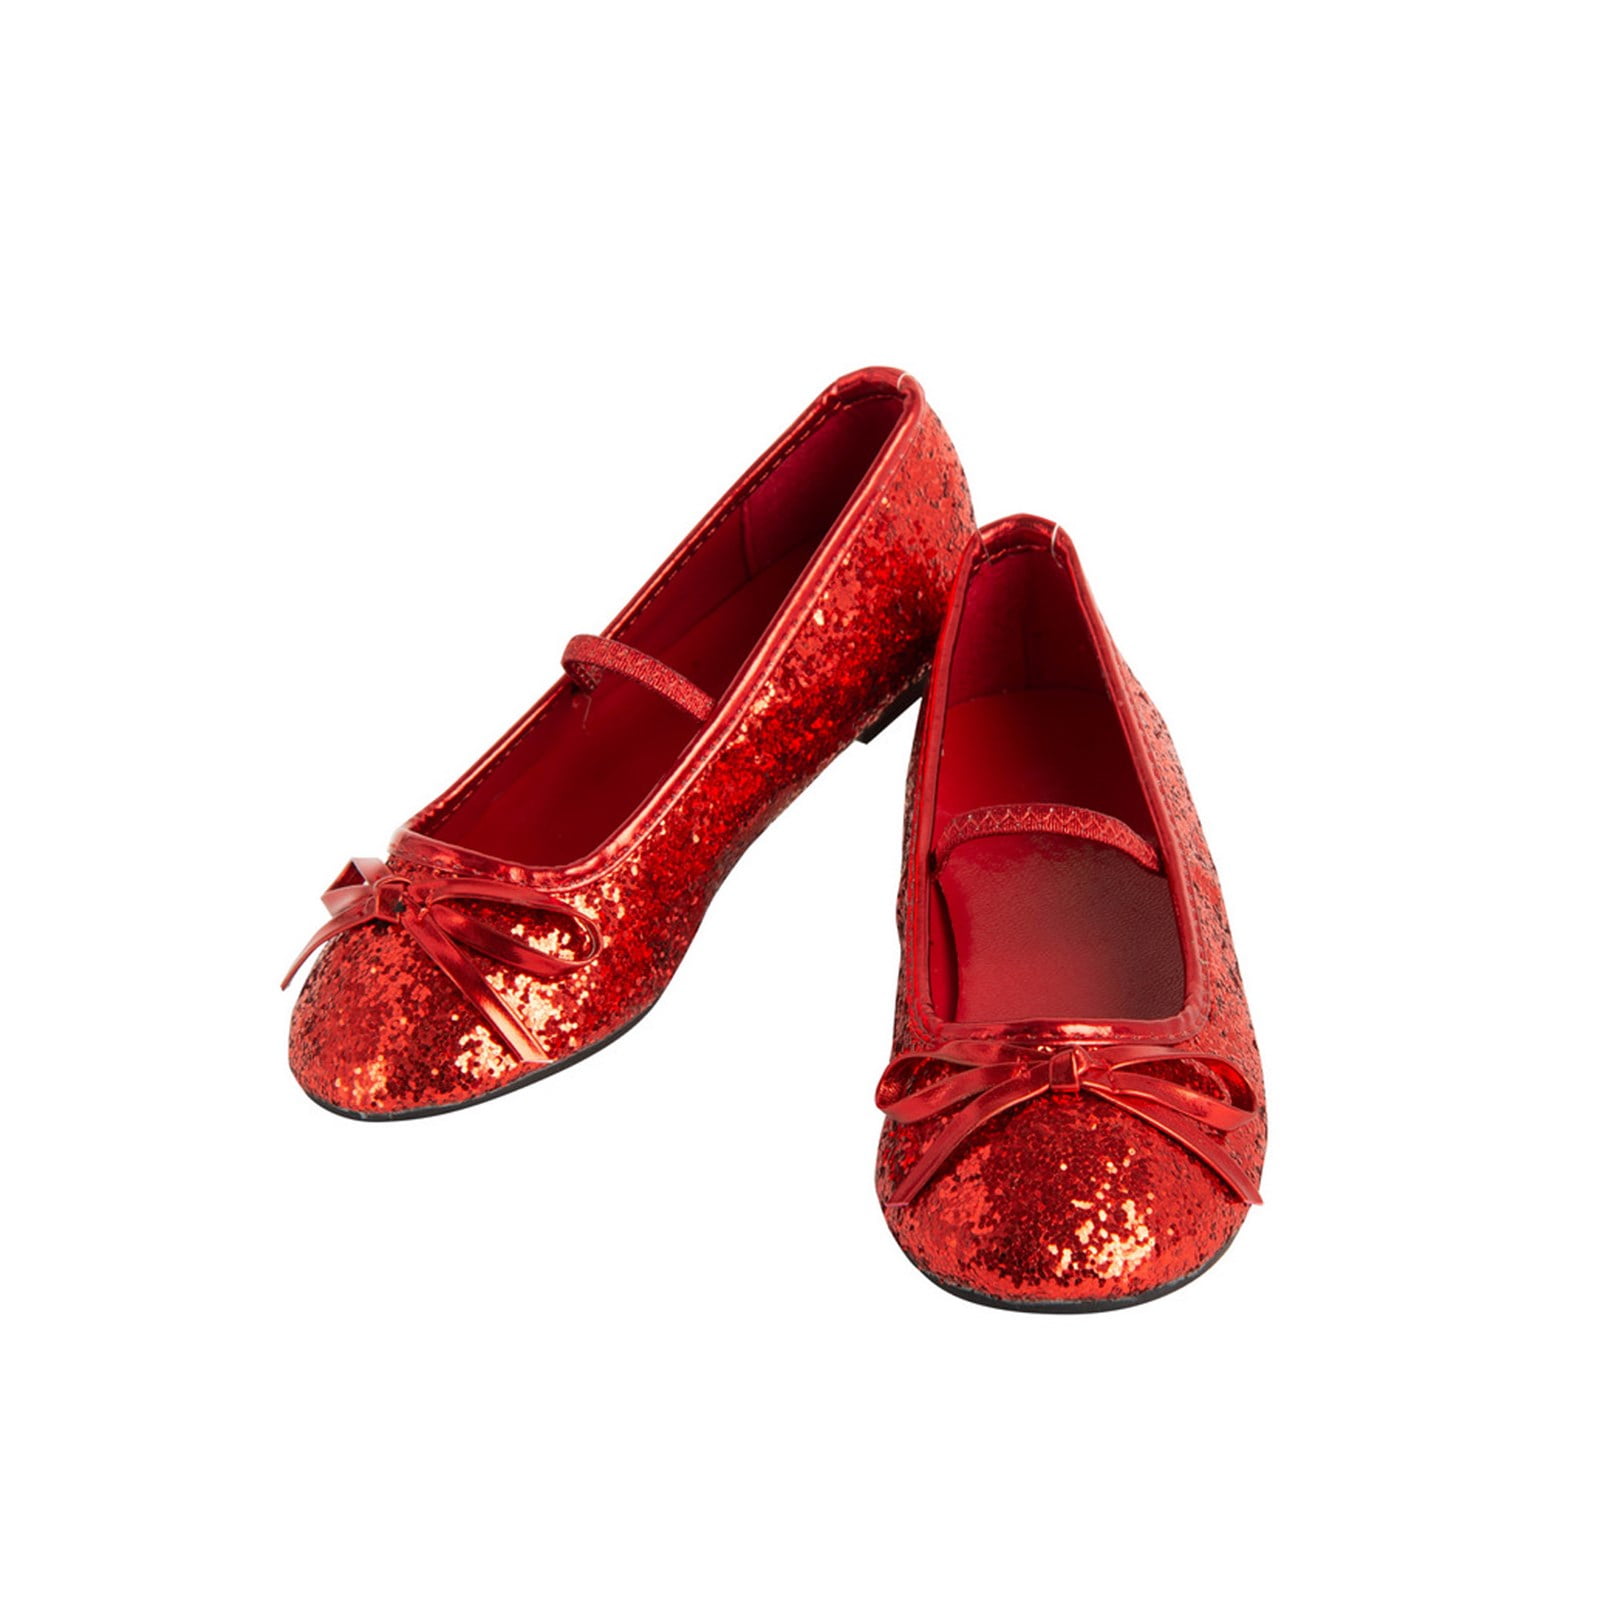 Infant Girls Children Red Sparkly Dorothy Shoes Ballerina Party Dressing Up New 